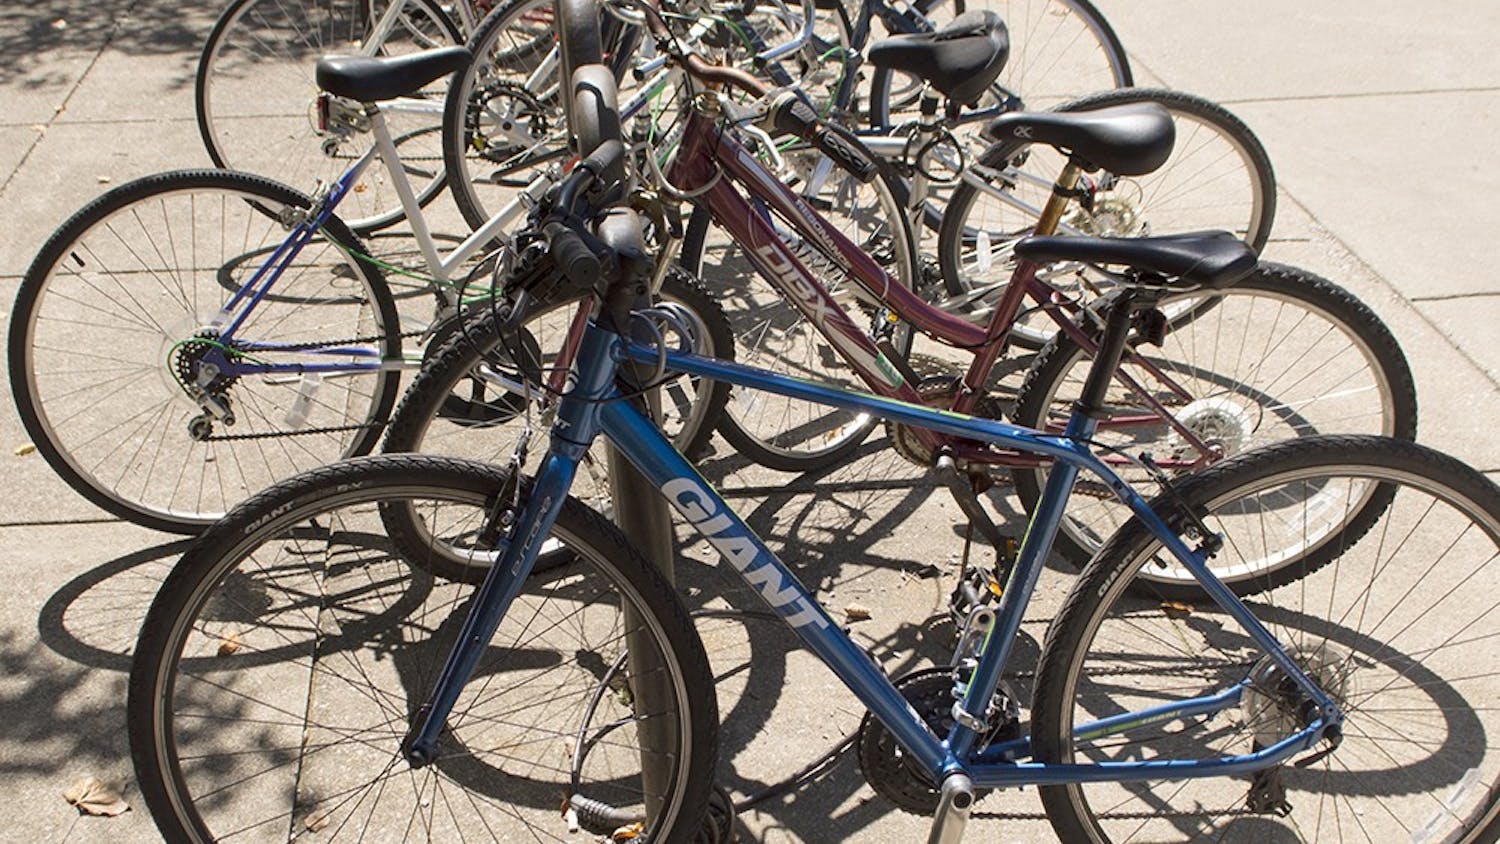 The Crimson Cruisers program provides free bikes to students, staff and faculty each semester.